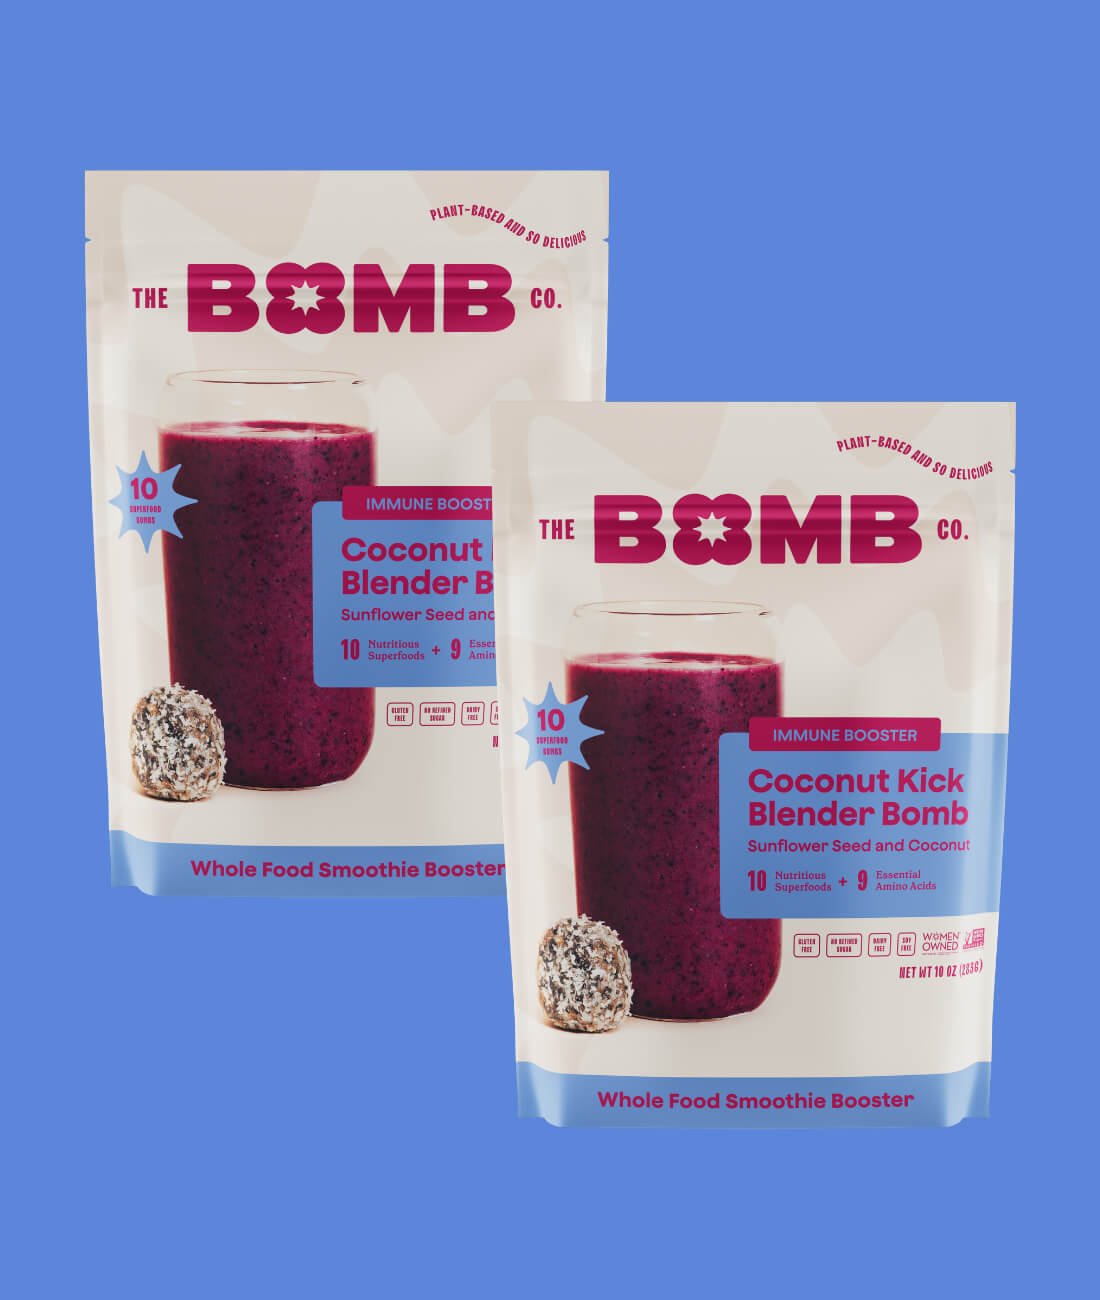 Blender Bombs Cacao and Peanut Butter Superfood Booster for Smoothies, 5.7  Oz